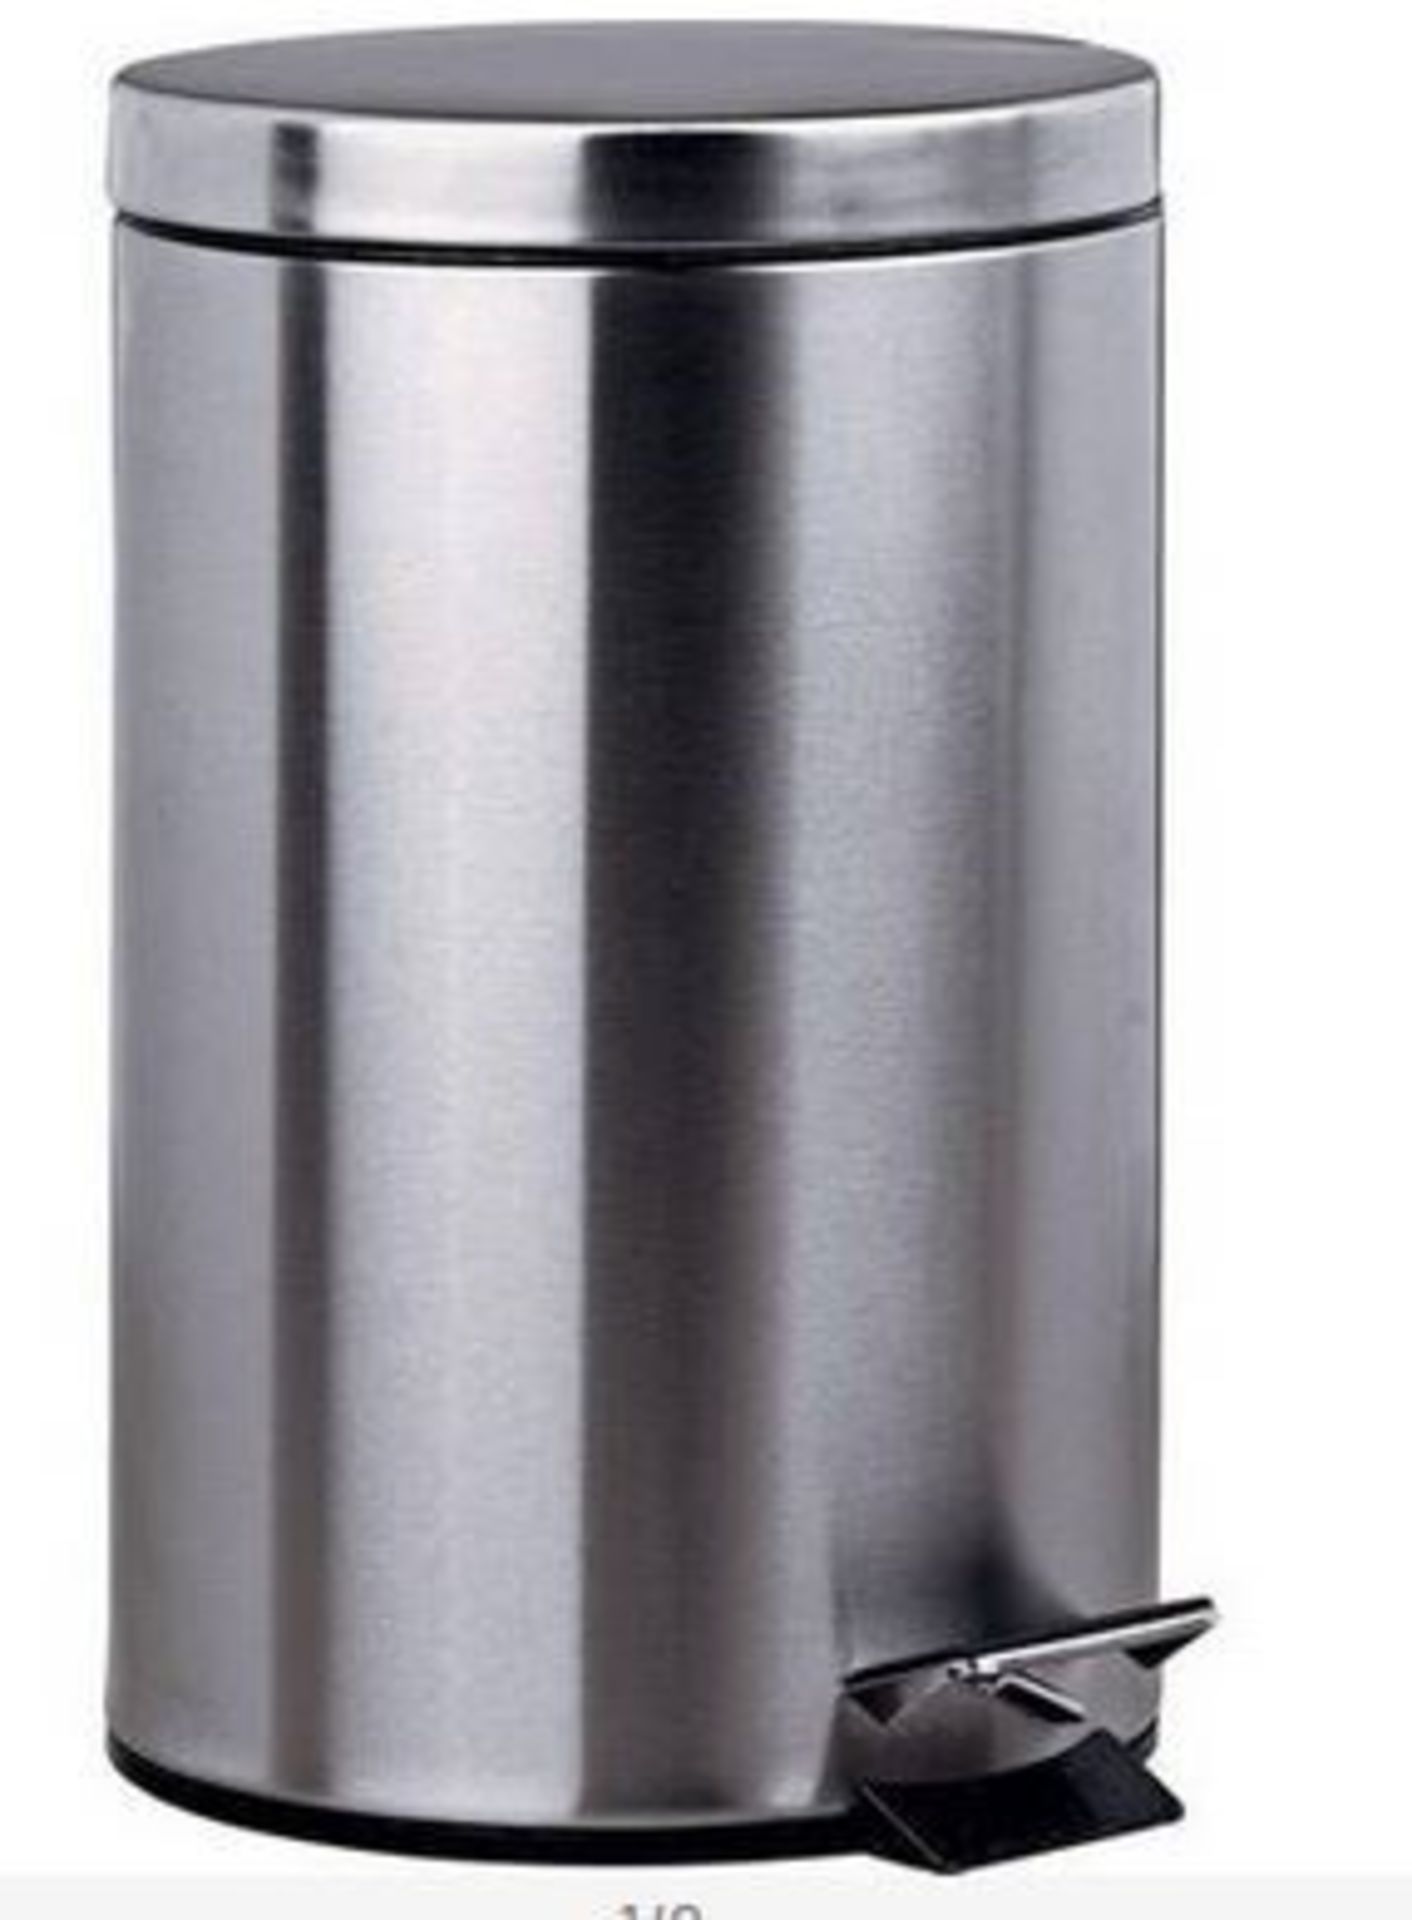 1 BOXED 12 LITRE SMALL PEDAL BIN IN CHROME (PUBLIC VIEWING AVAILABLE)